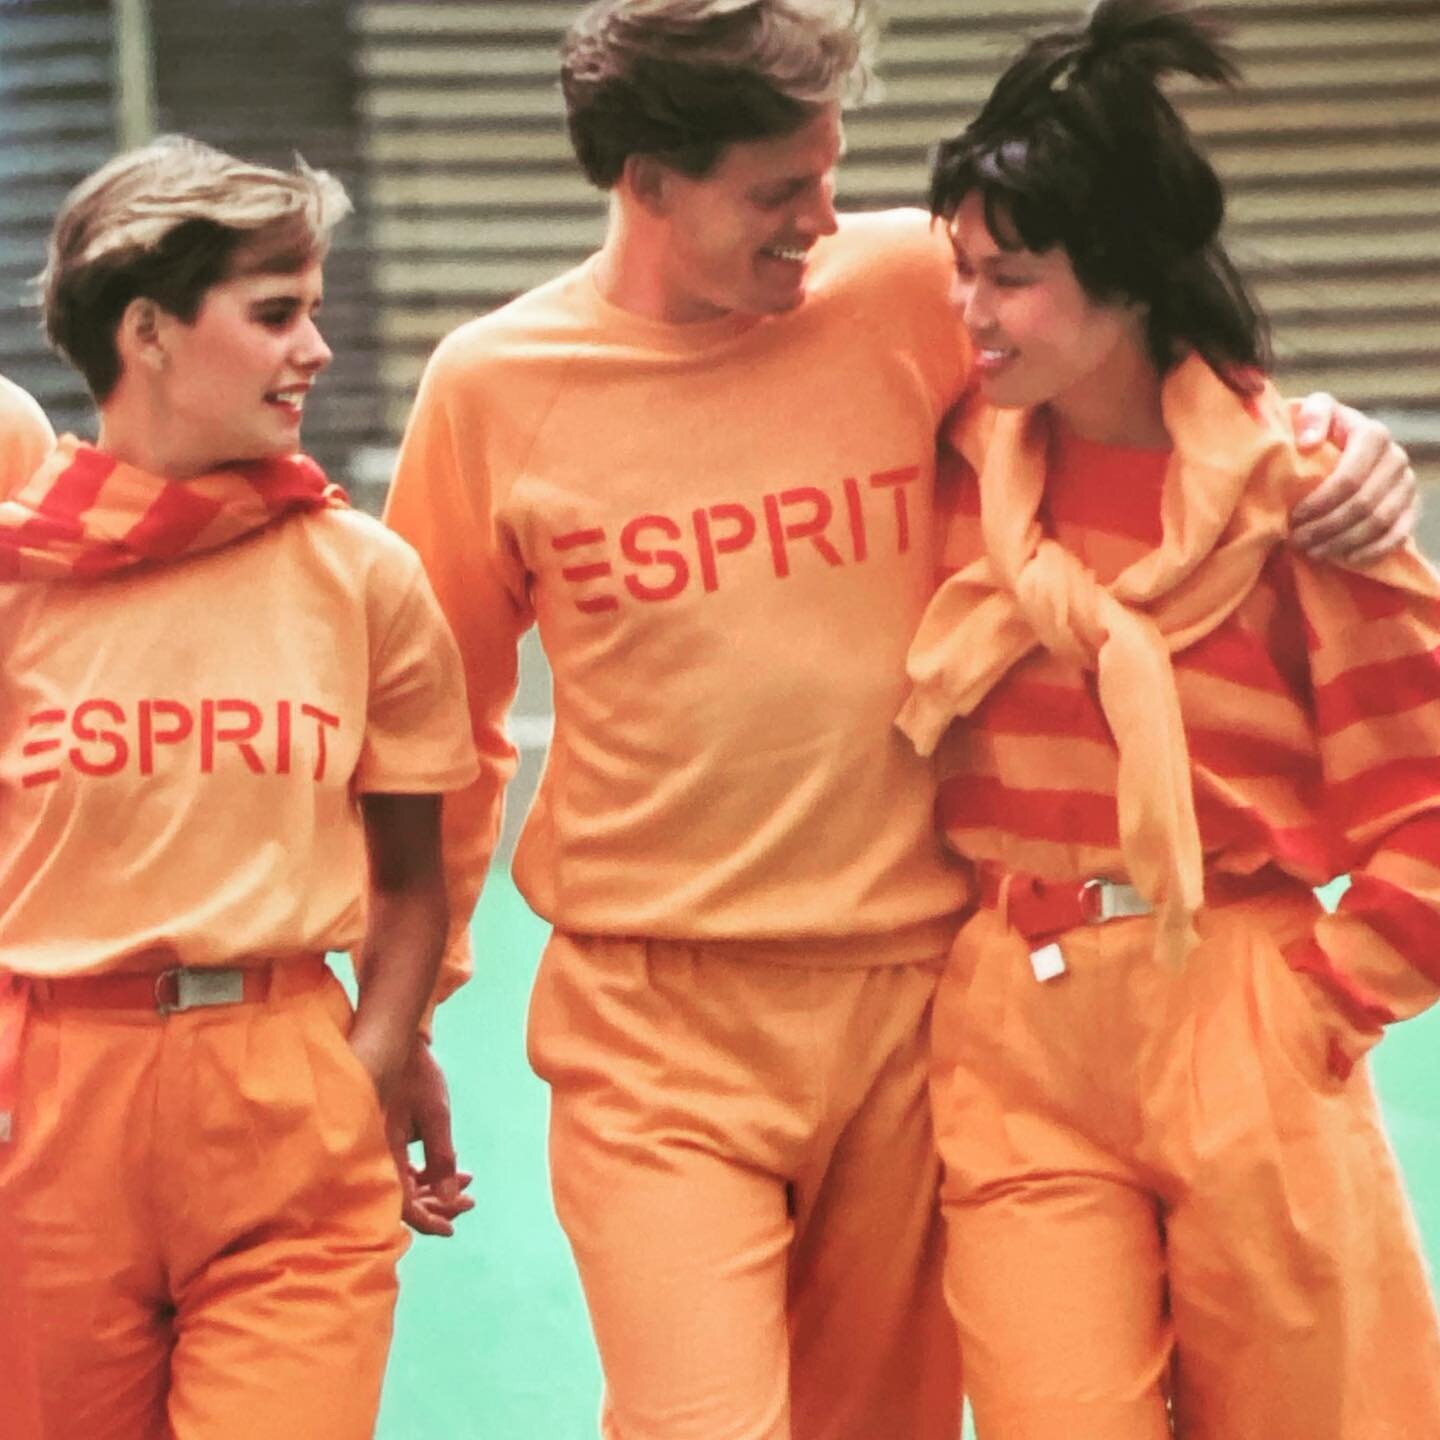 It&rsquo;s beginning to feel like fall 🍂 
_
Esprit Sport Holiday 1983 catalog 

_
Credit:
Photography: O. Toscani
Graphics: John Casado and Esprit Graphic Design 
Hair: Valentin 
Makeup: Tory Jeffery
.
.
.
.
.
.
.
.
.
.
.
.
.
Photo credit: Esprit He